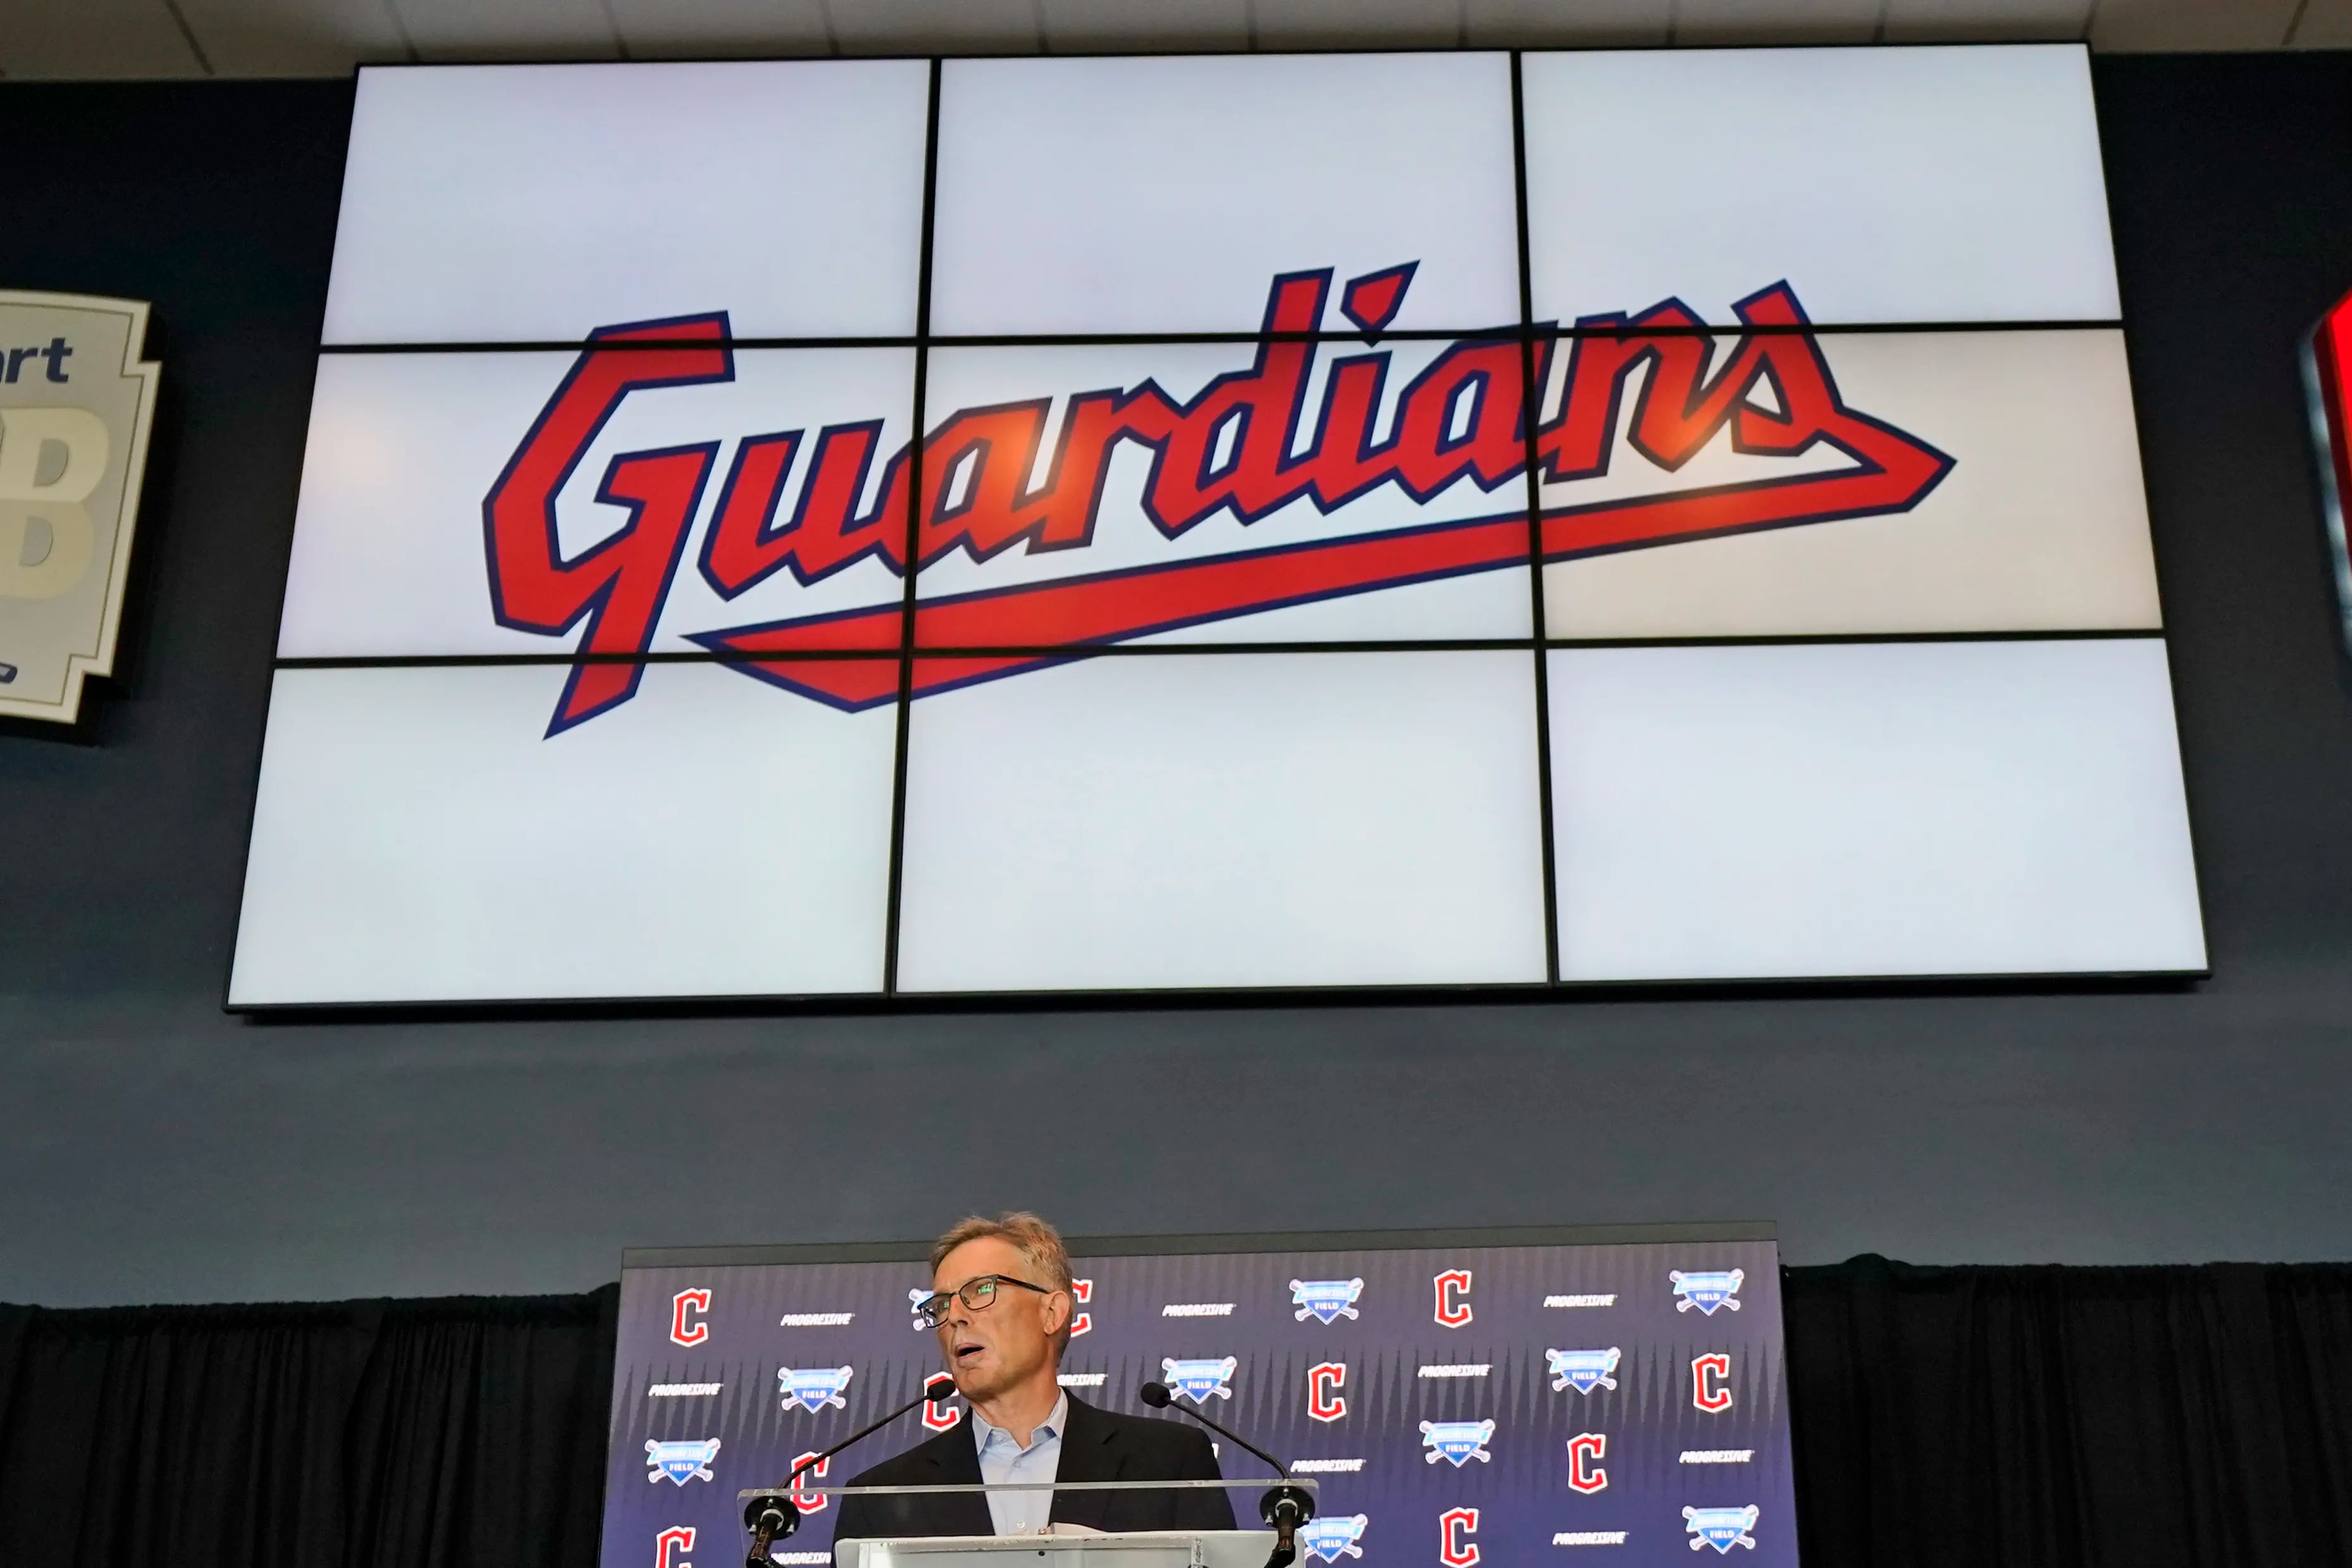 Cleveland changes MLB team nickname to Guardians after months of discussion